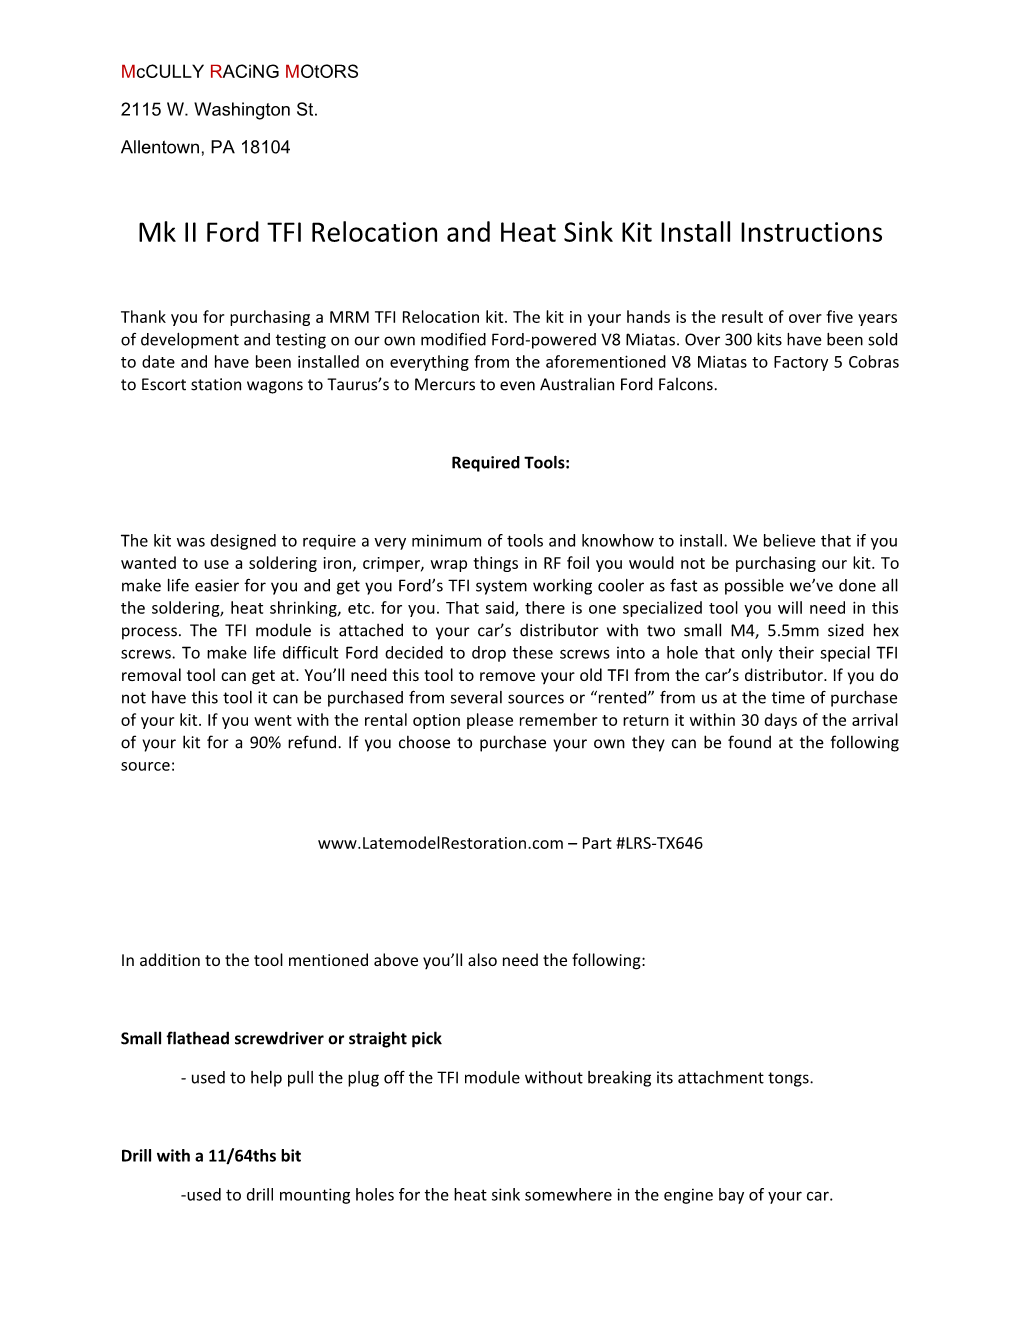 Mk II Ford TFI Relocation and Heat Sink Kit Install Instructions